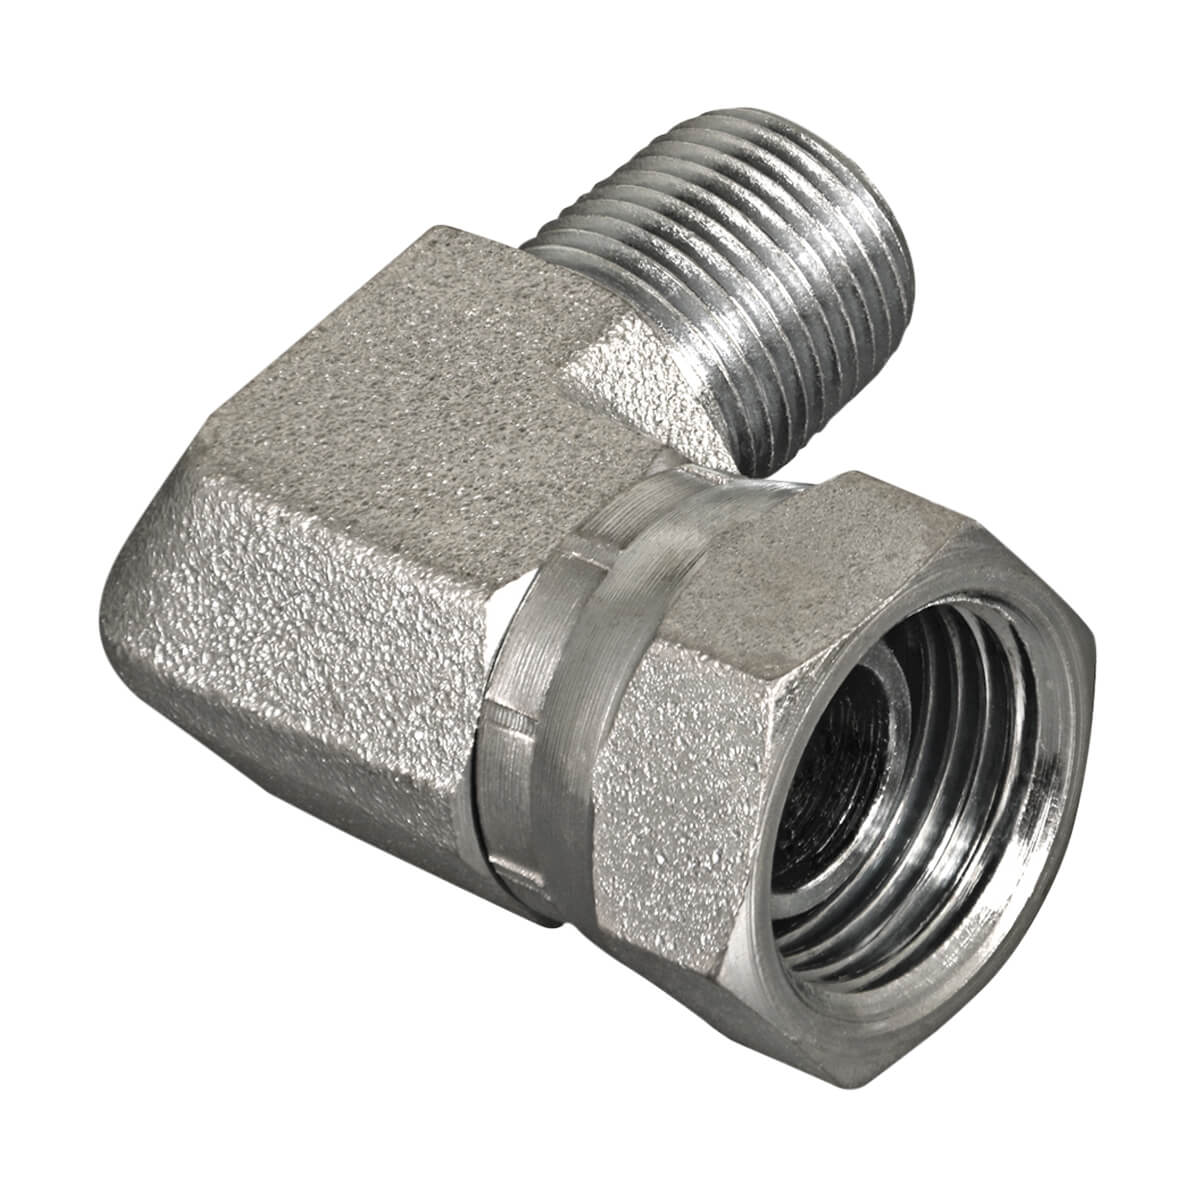 Swivel Hydraulic Adapter - 1/2-in MPT x 3/8-in FPT 90 Degree